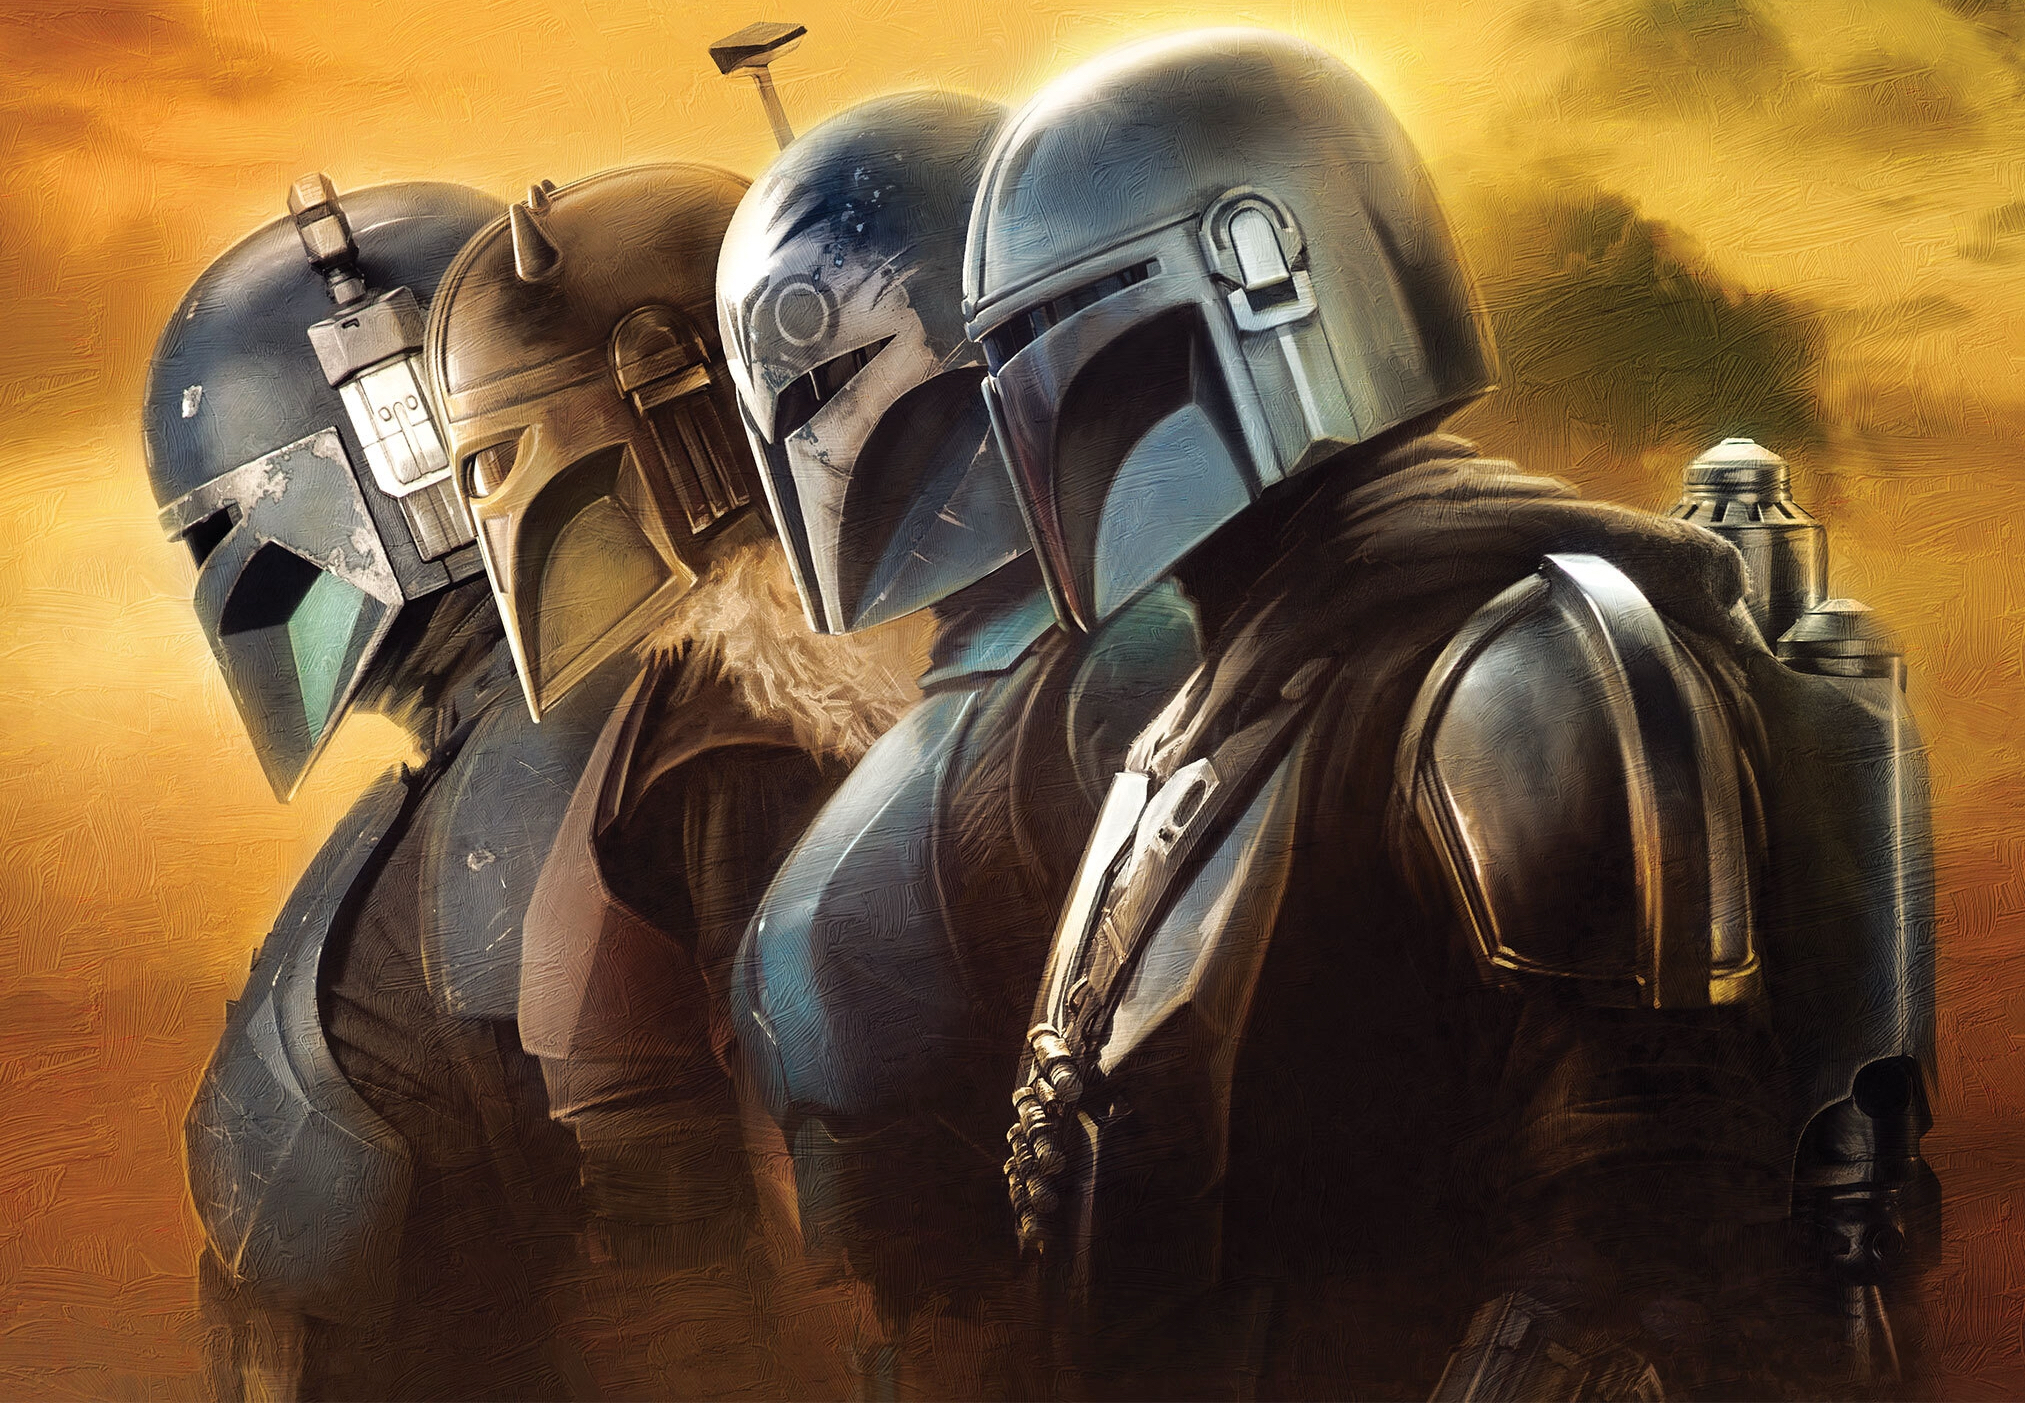 3325 The Mandalorian Star Wars TV Series Wallpaper  Android  iPhone  HD Wallpaper Background Download HD Wallpapers Desktop Background   Android  iPhone 1080p 4k 1080x1528 2023